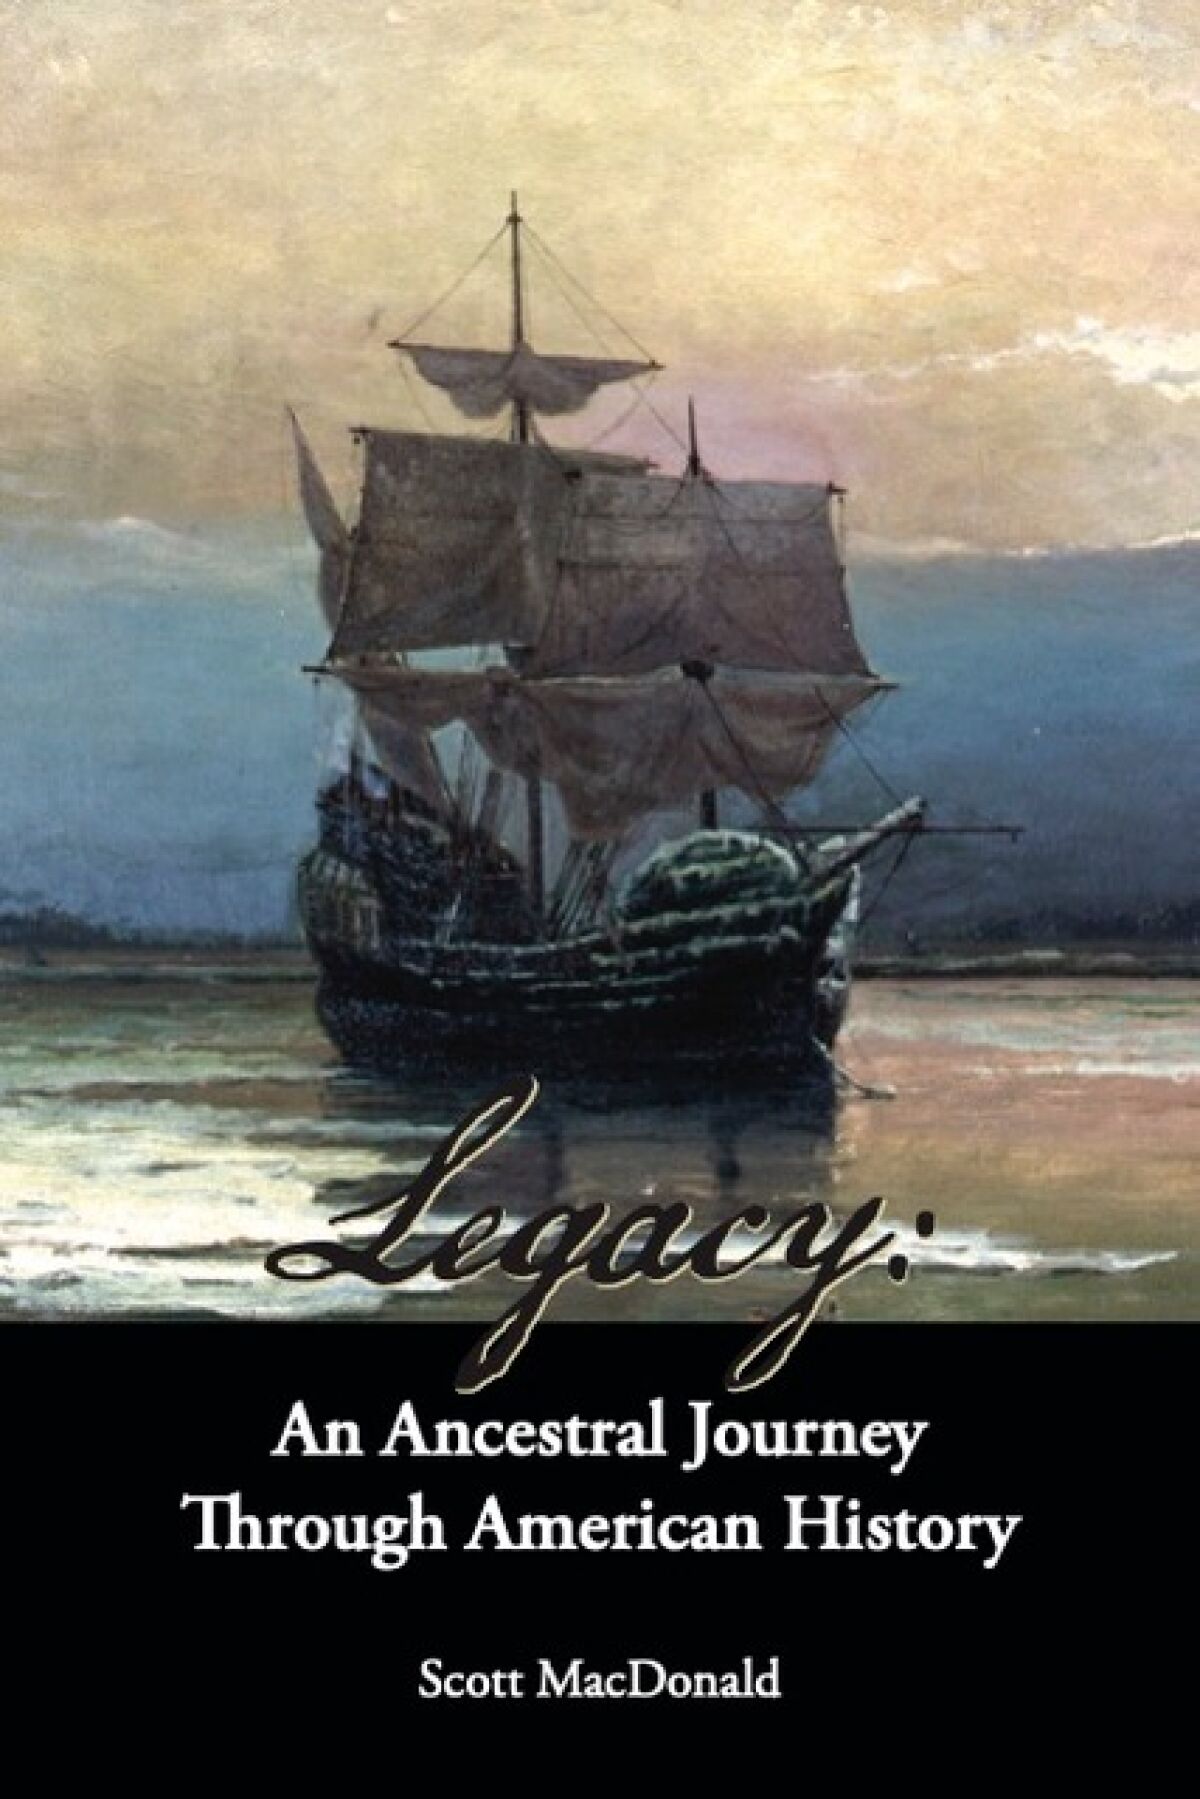 "Legacy" is MacDonald's fourth book.